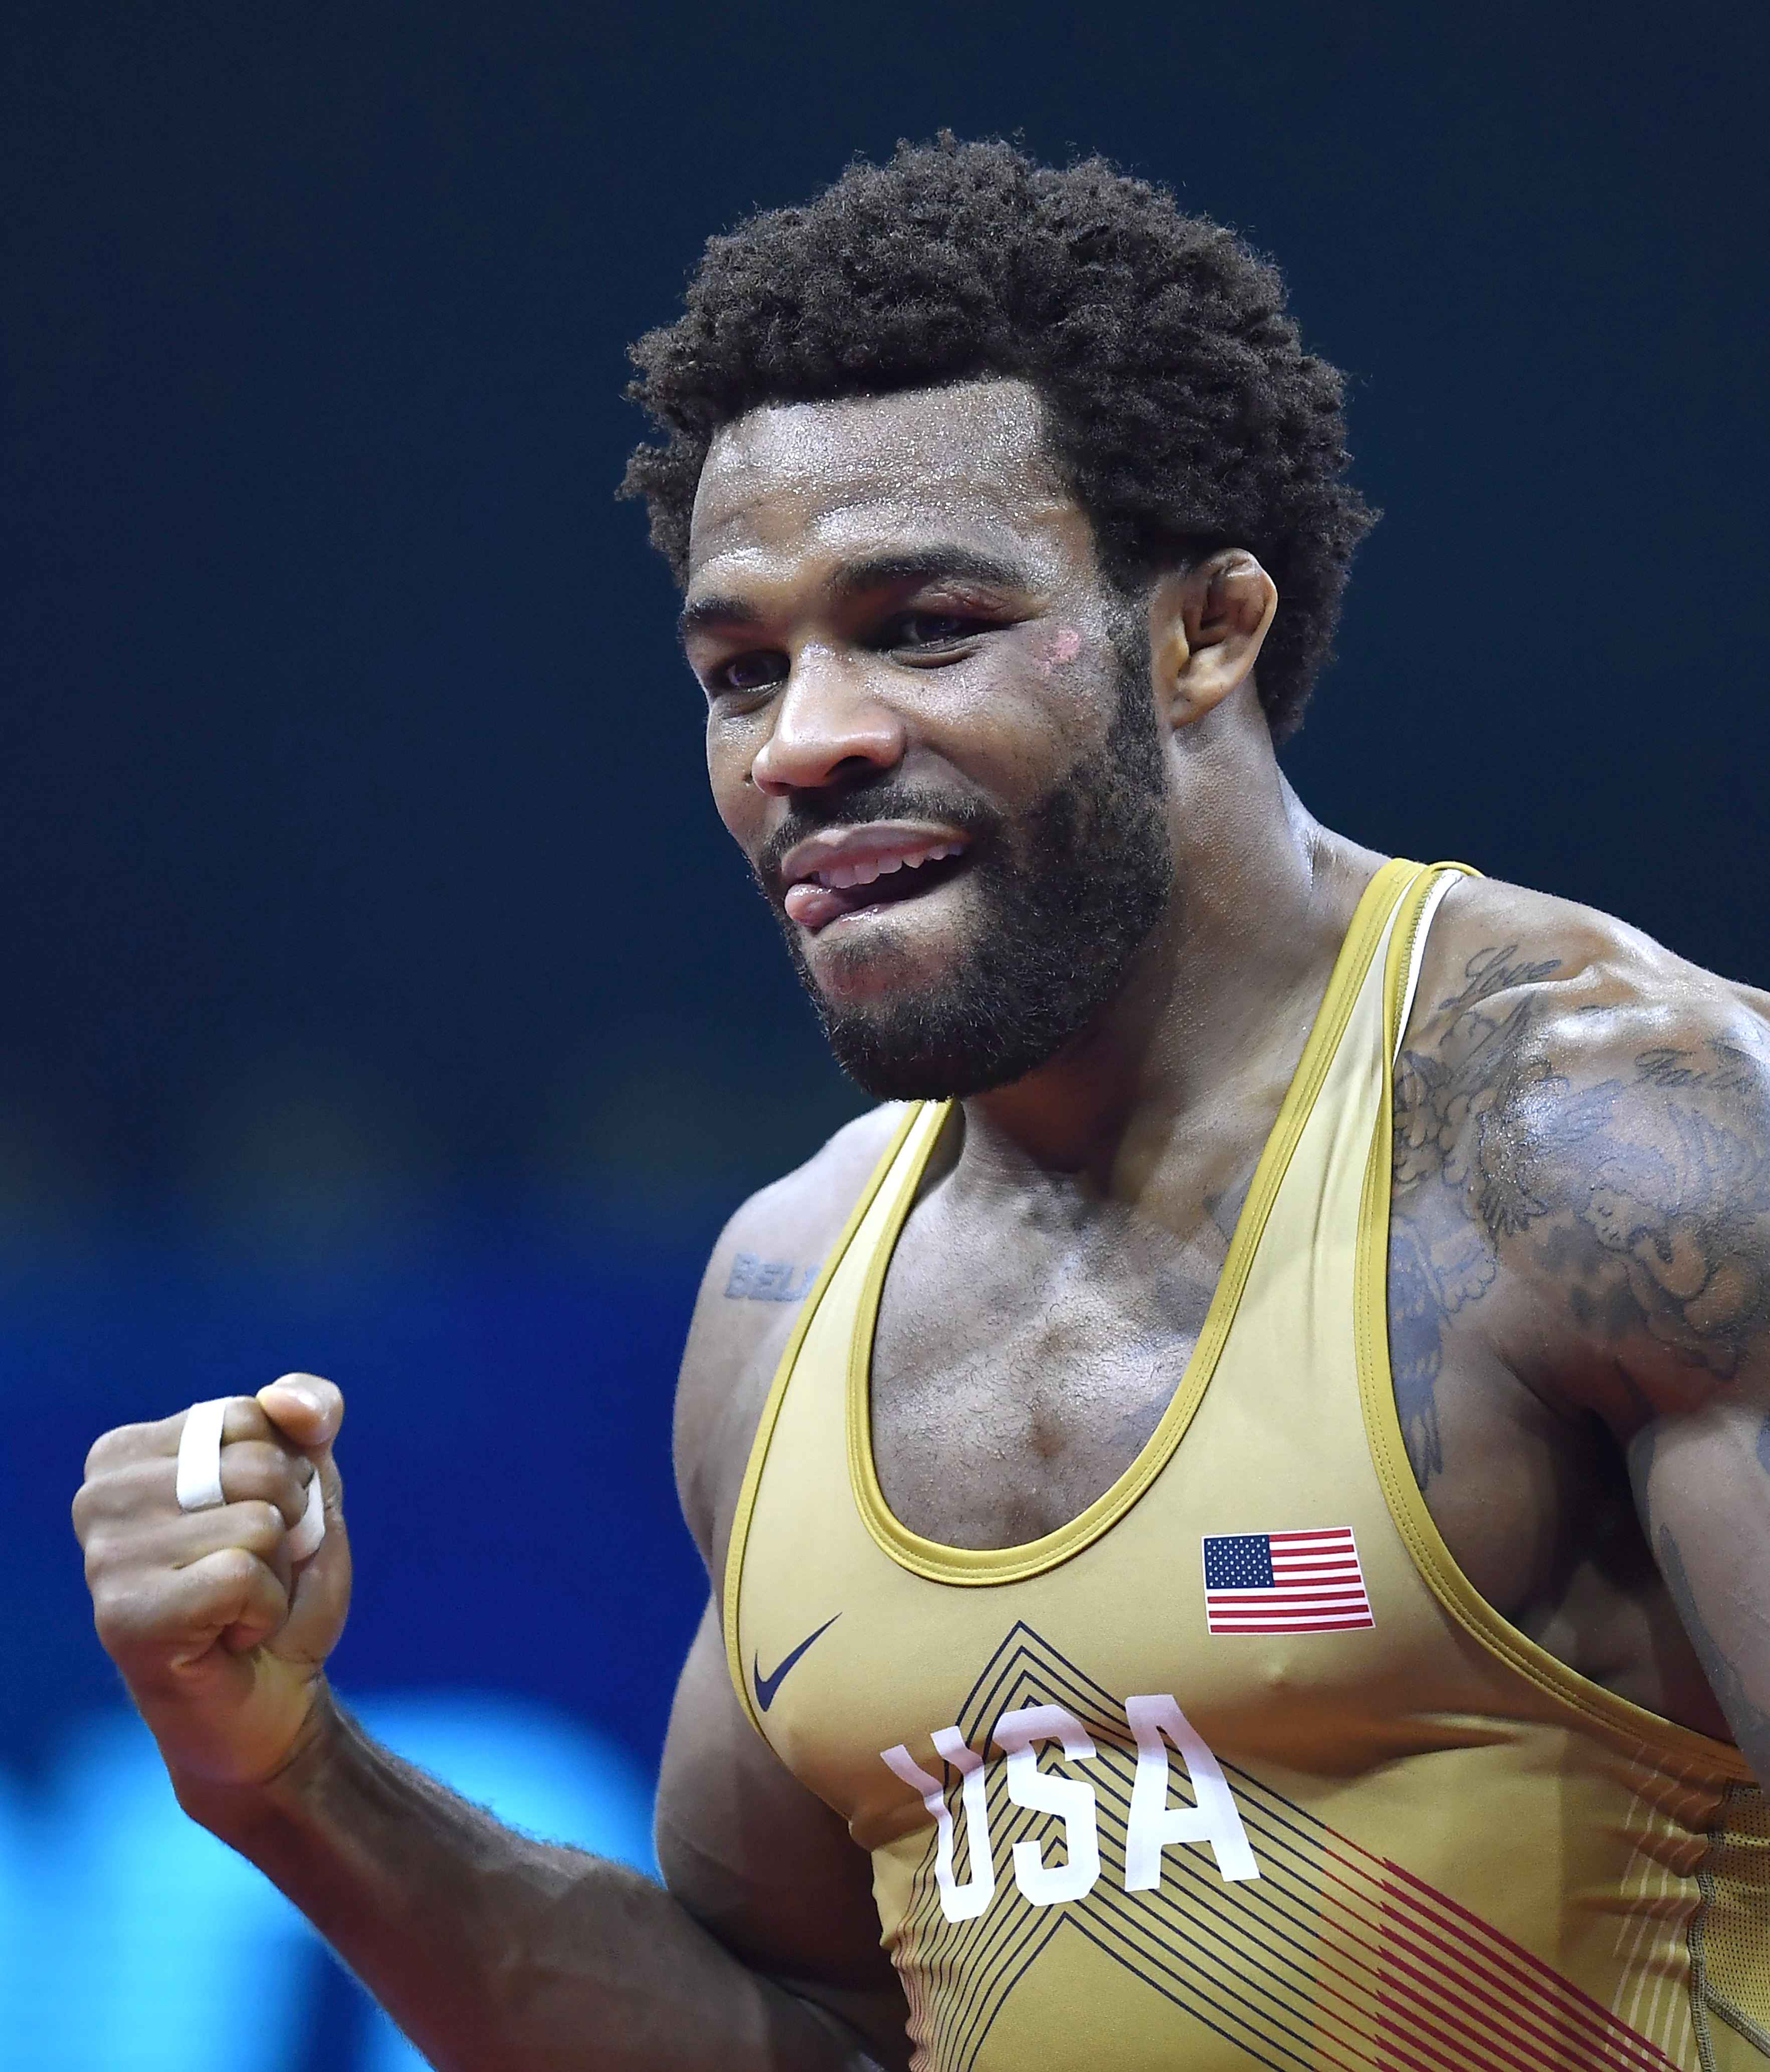 USA Wrestling Olympic Trials 2021 Live stream, TV schedule, how to watch